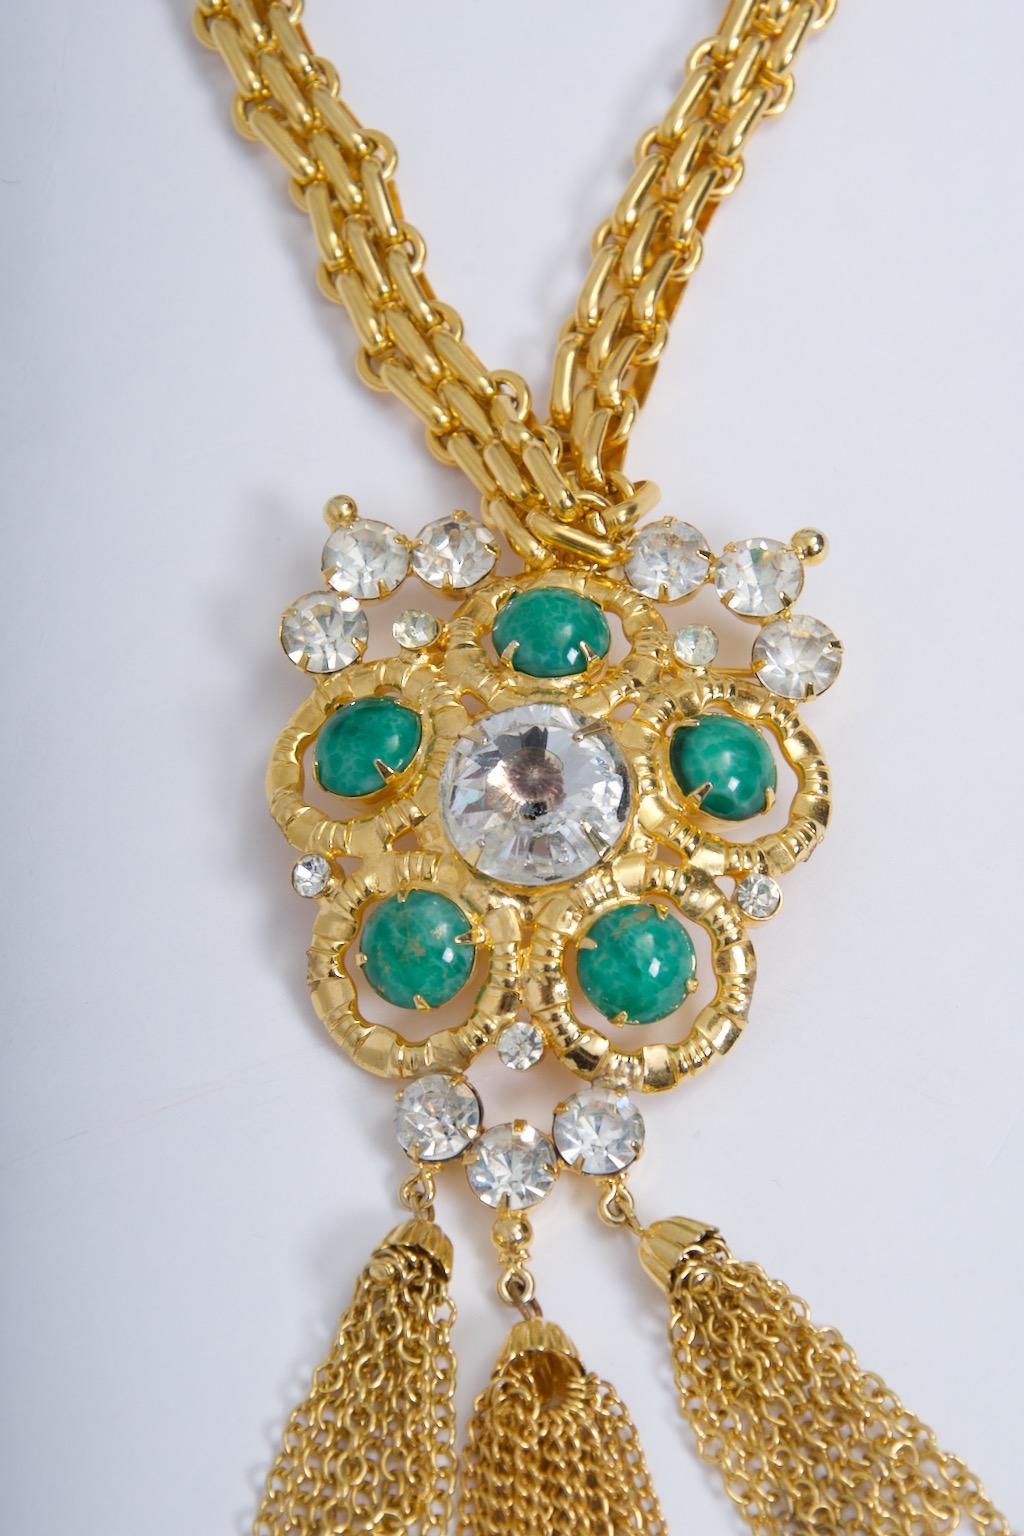 ART Large Necklace/Brooch In Excellent Condition For Sale In Alford, MA